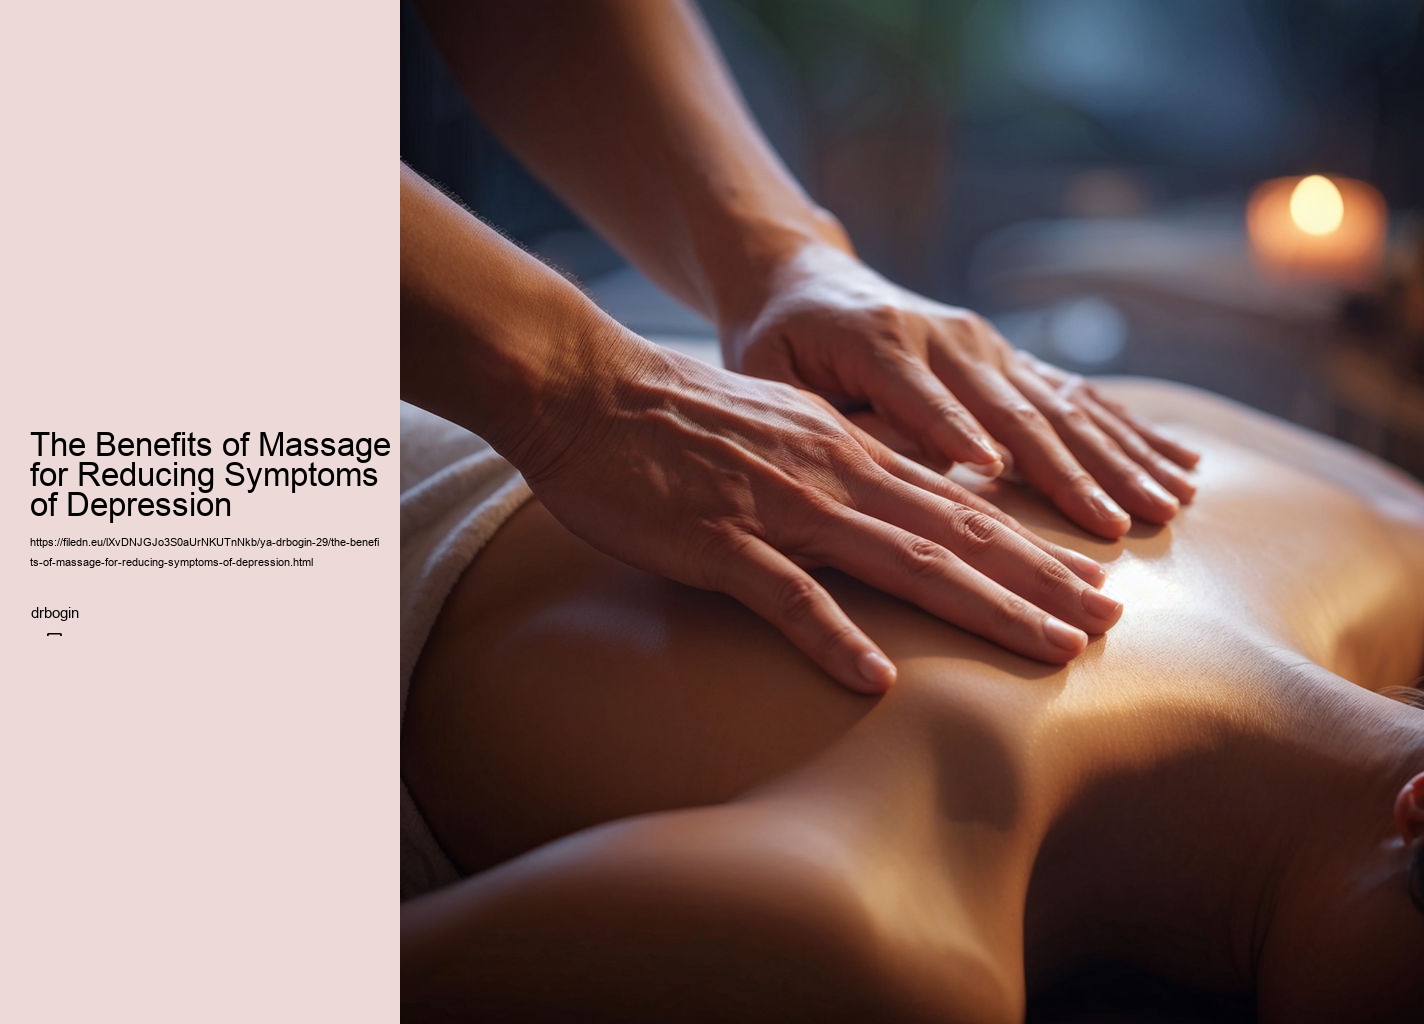 The Benefits of Massage for Reducing Symptoms of Depression